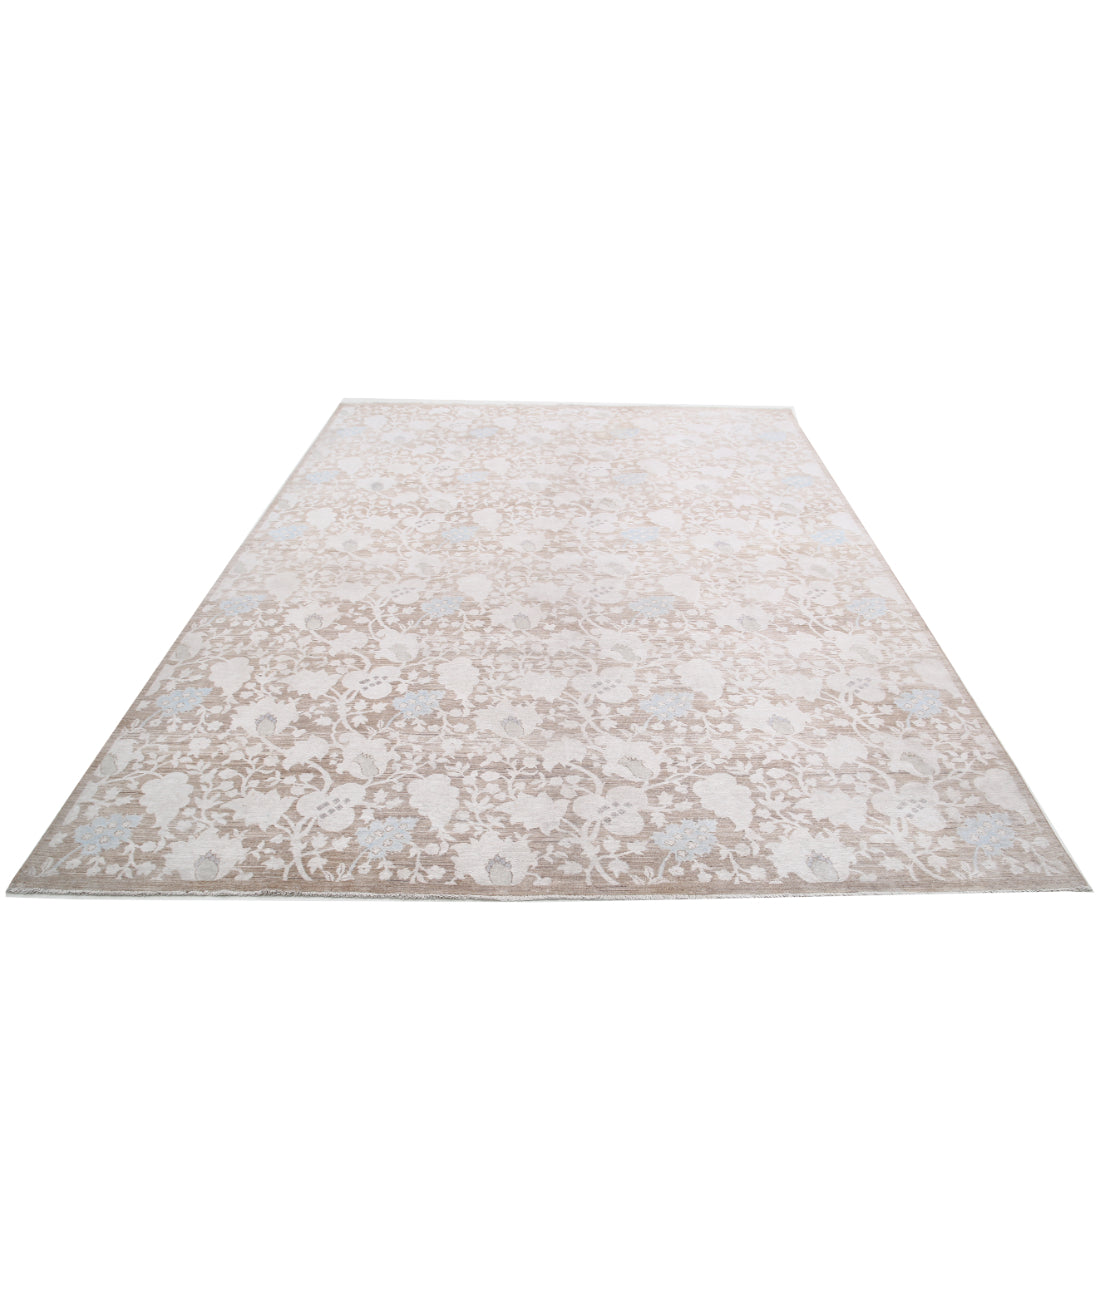 Hand Knotted Artemix Wool Rug - 7'8'' x 10'1'' 7'8'' x 10'1'' (230 X 303) / Brown / Ivory